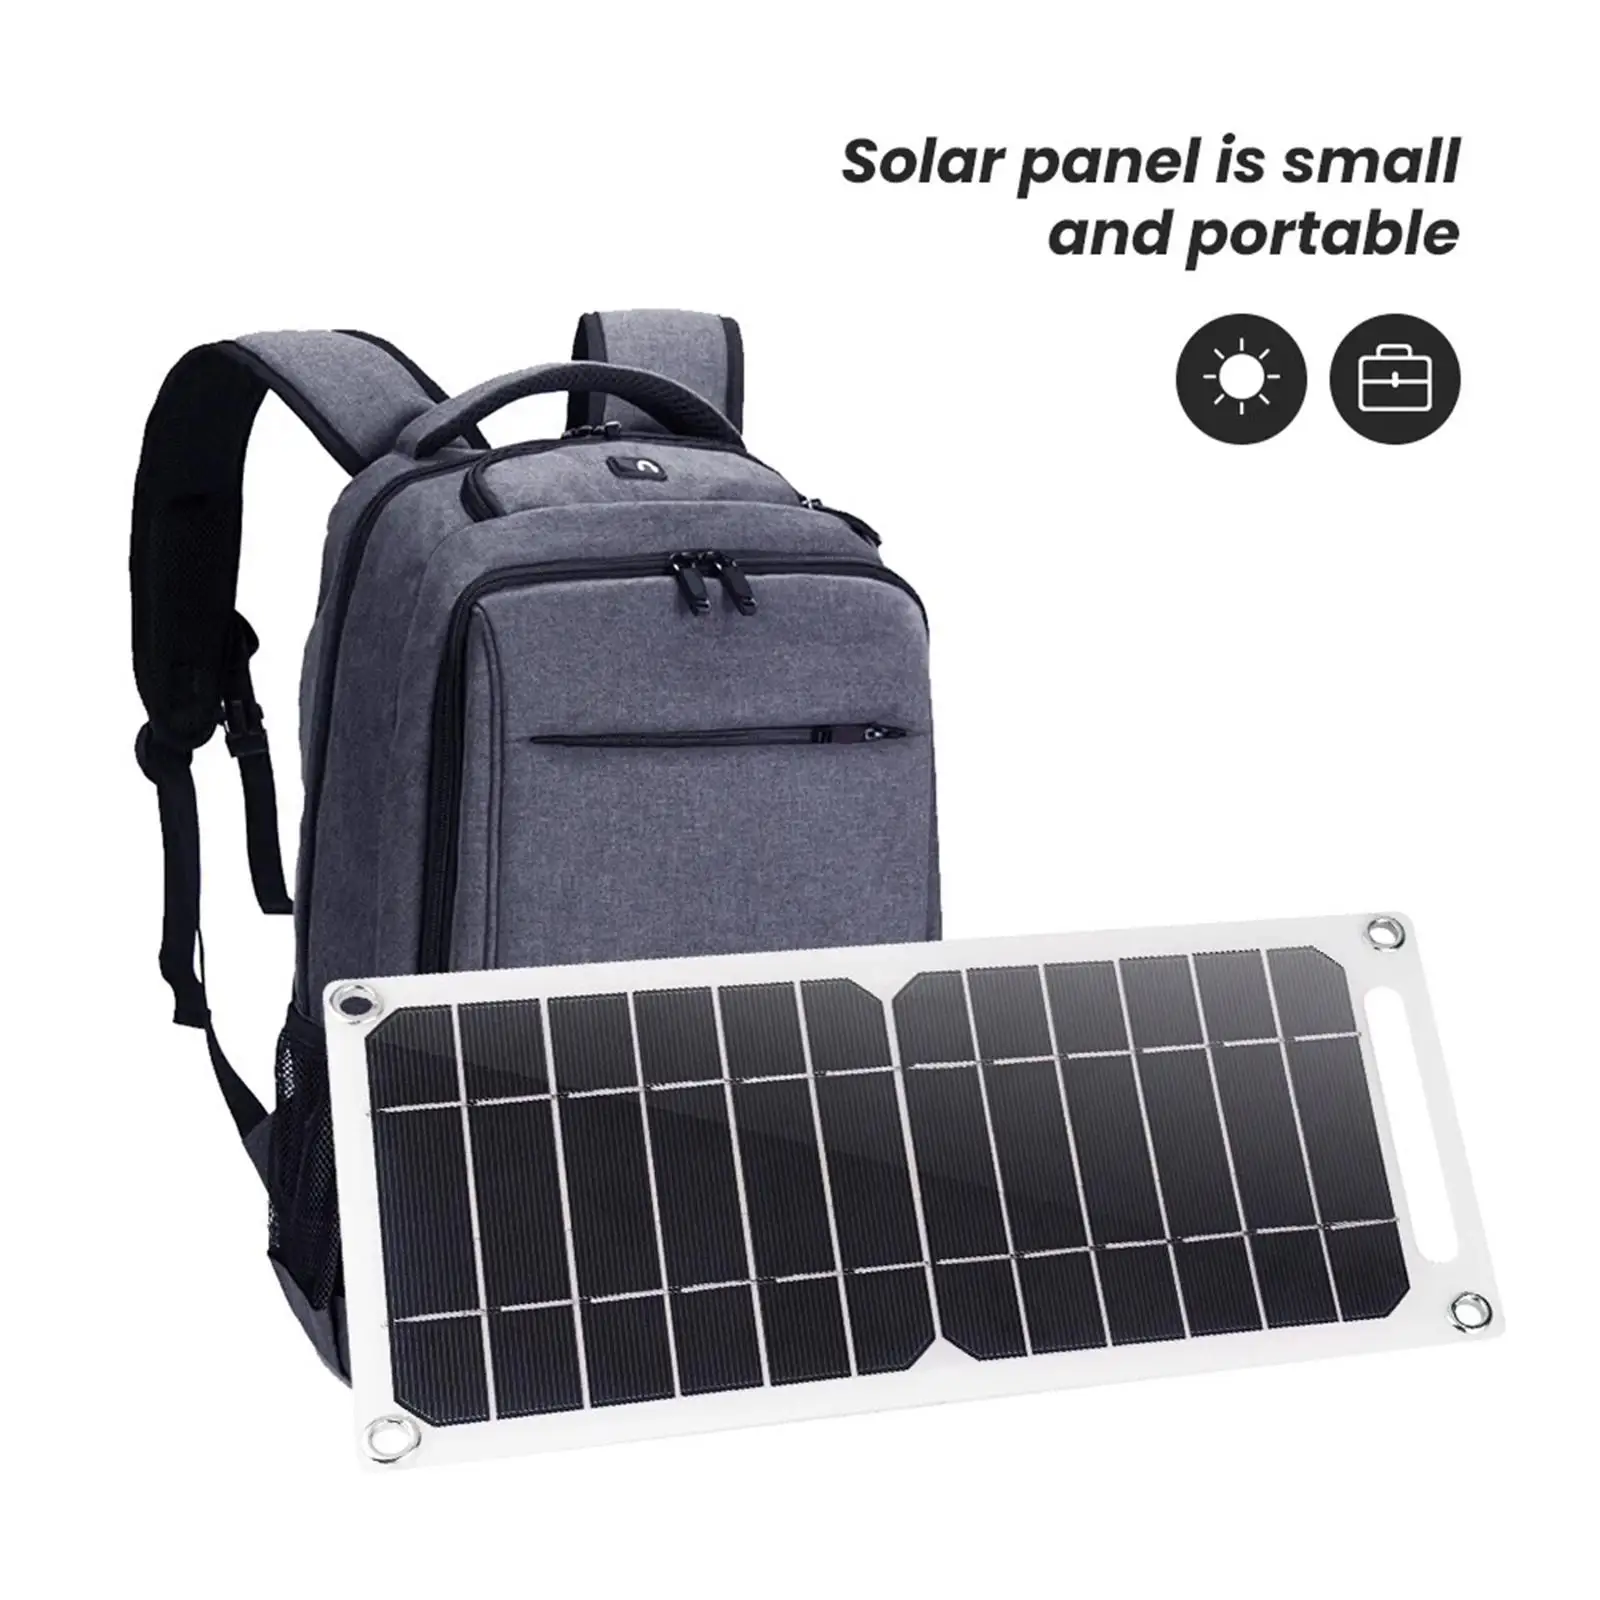 5V 6W Solar Panel Battery Charger USB Port Trickle Charge Monocrystalline for Cell Phone Backpacking Travel Camping Outdoor